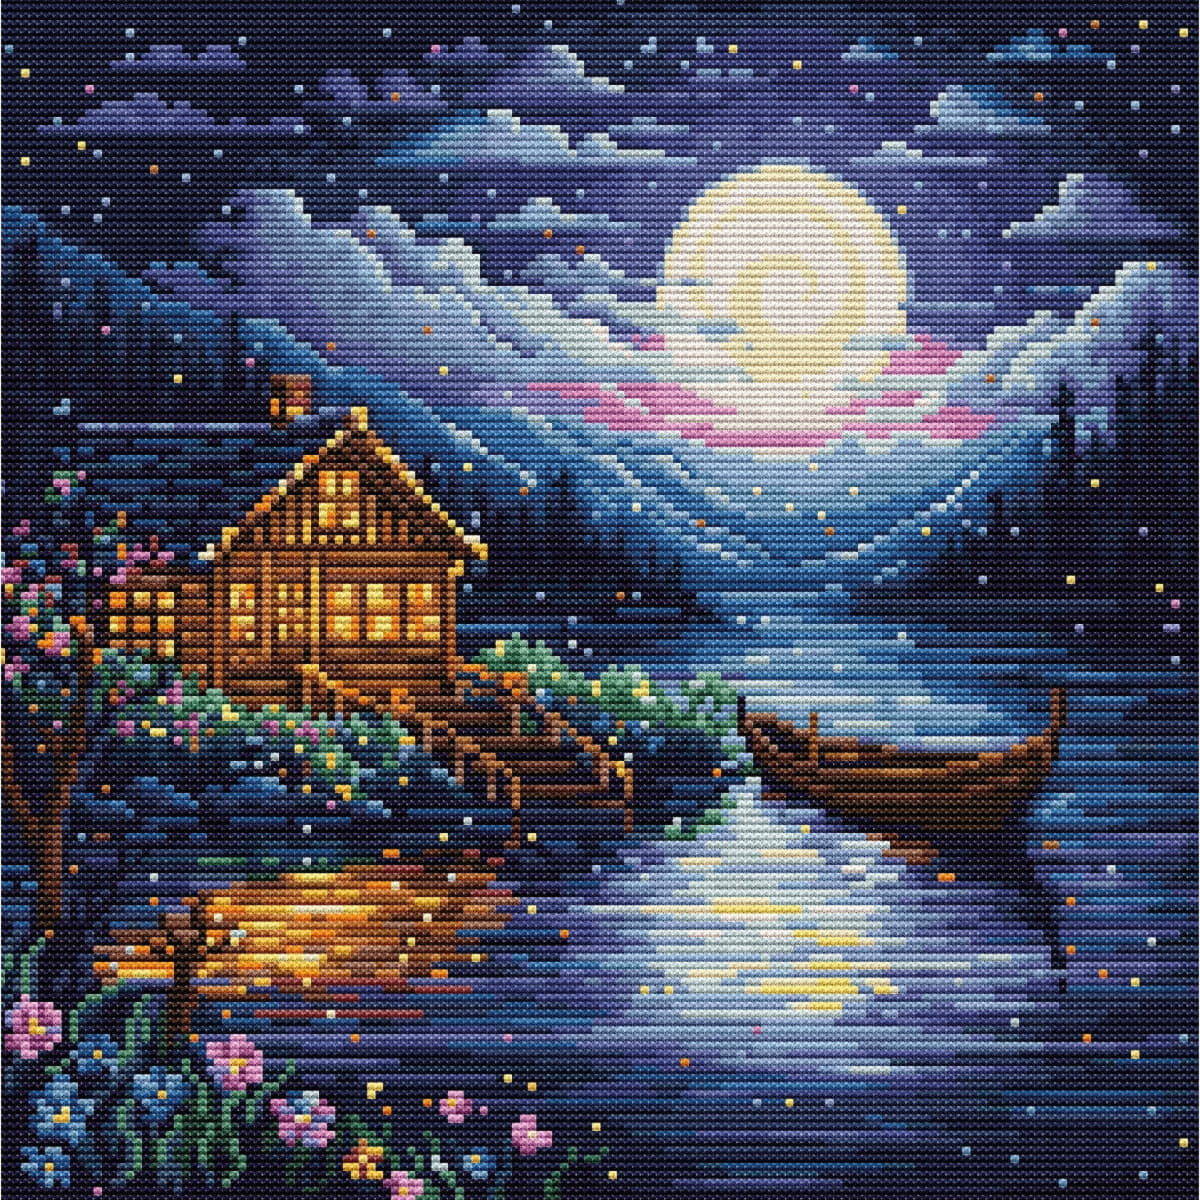 A tranquil night scene with a wooden hut next to a calm...